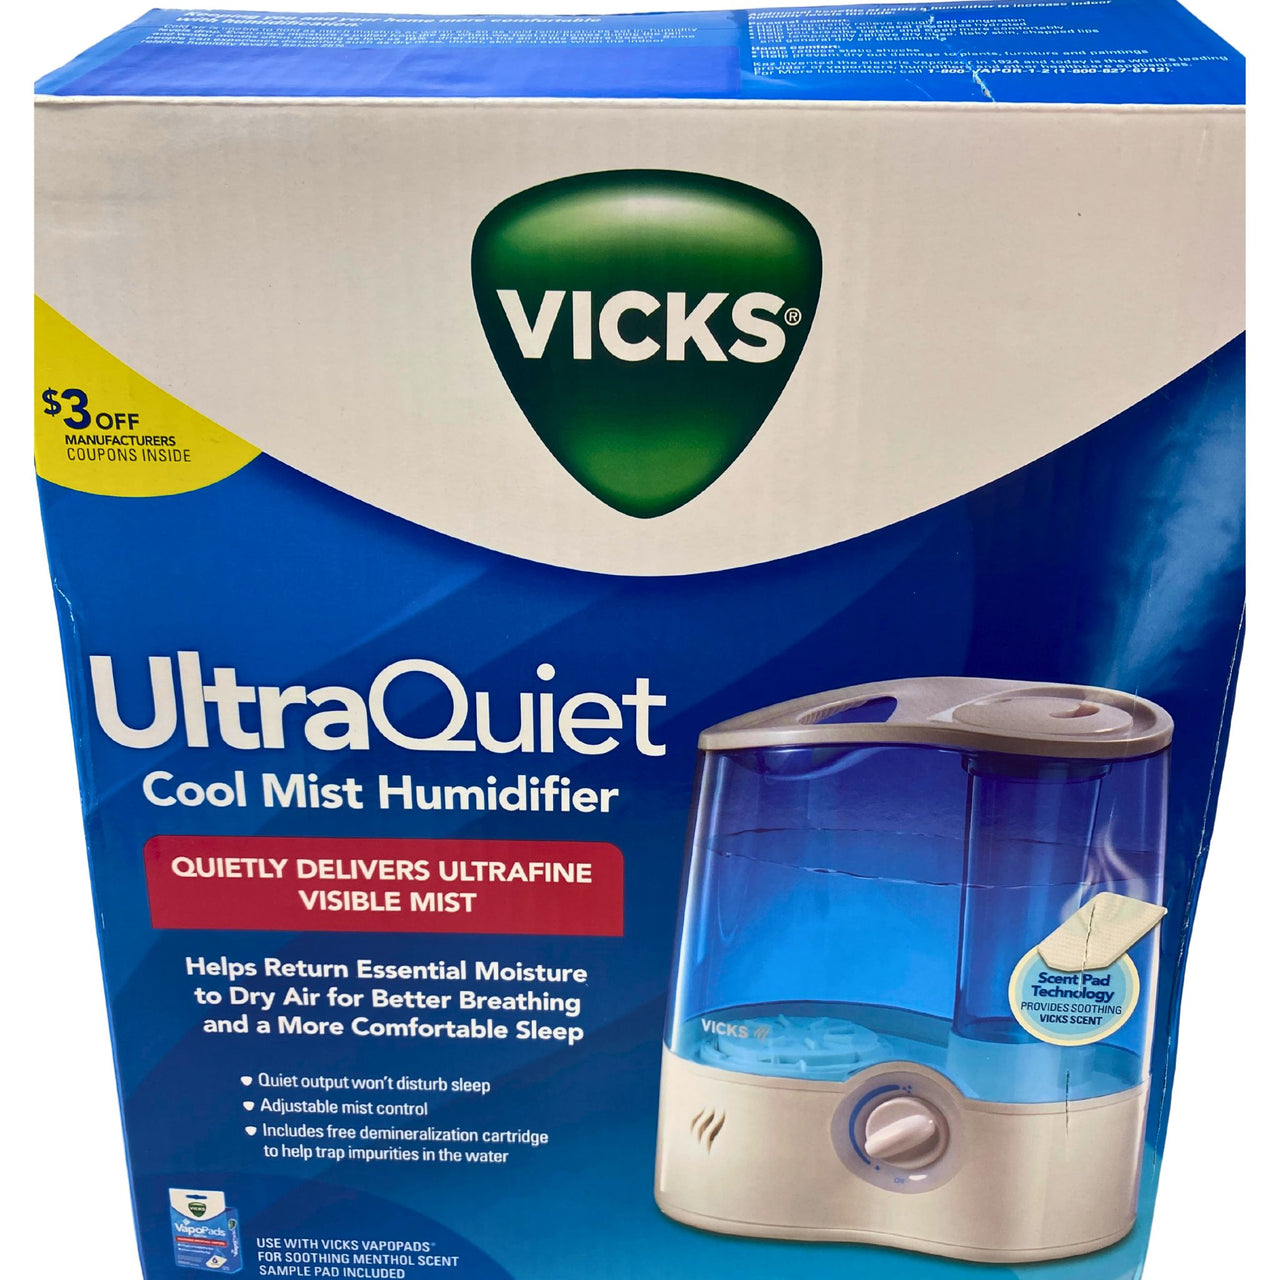 Ultra Quiet Cool Mist Humidifier, Quietly Delivers Ultrafine Visible Mist 